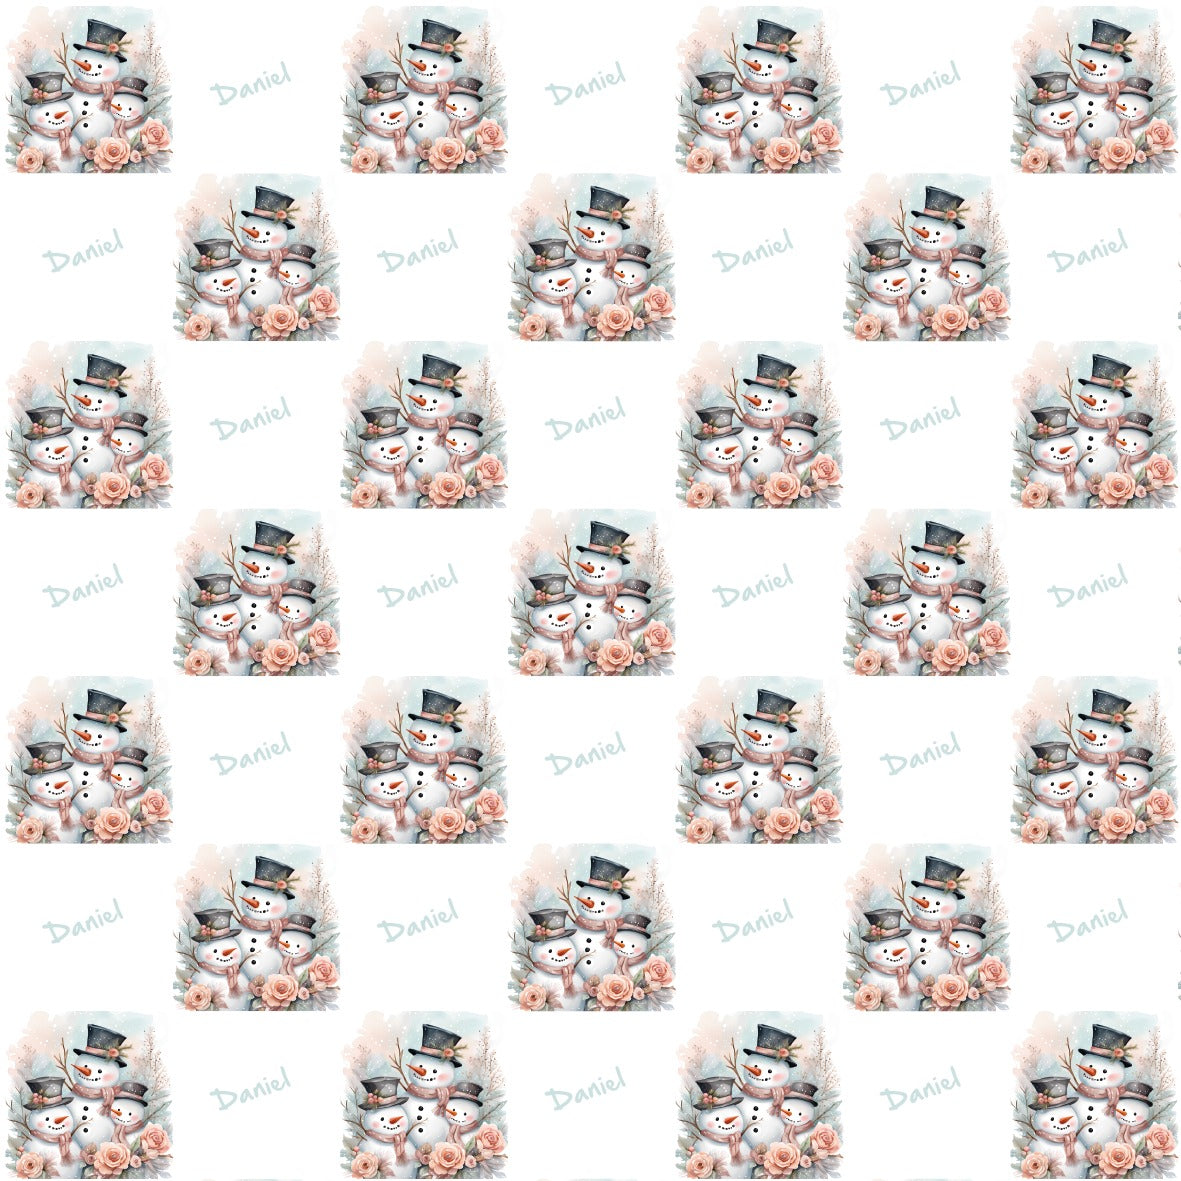 Snowman Wrapping paper with customizable name beside, a group of 3 snowmen in image as a family of snowmen. Repeating Pattern